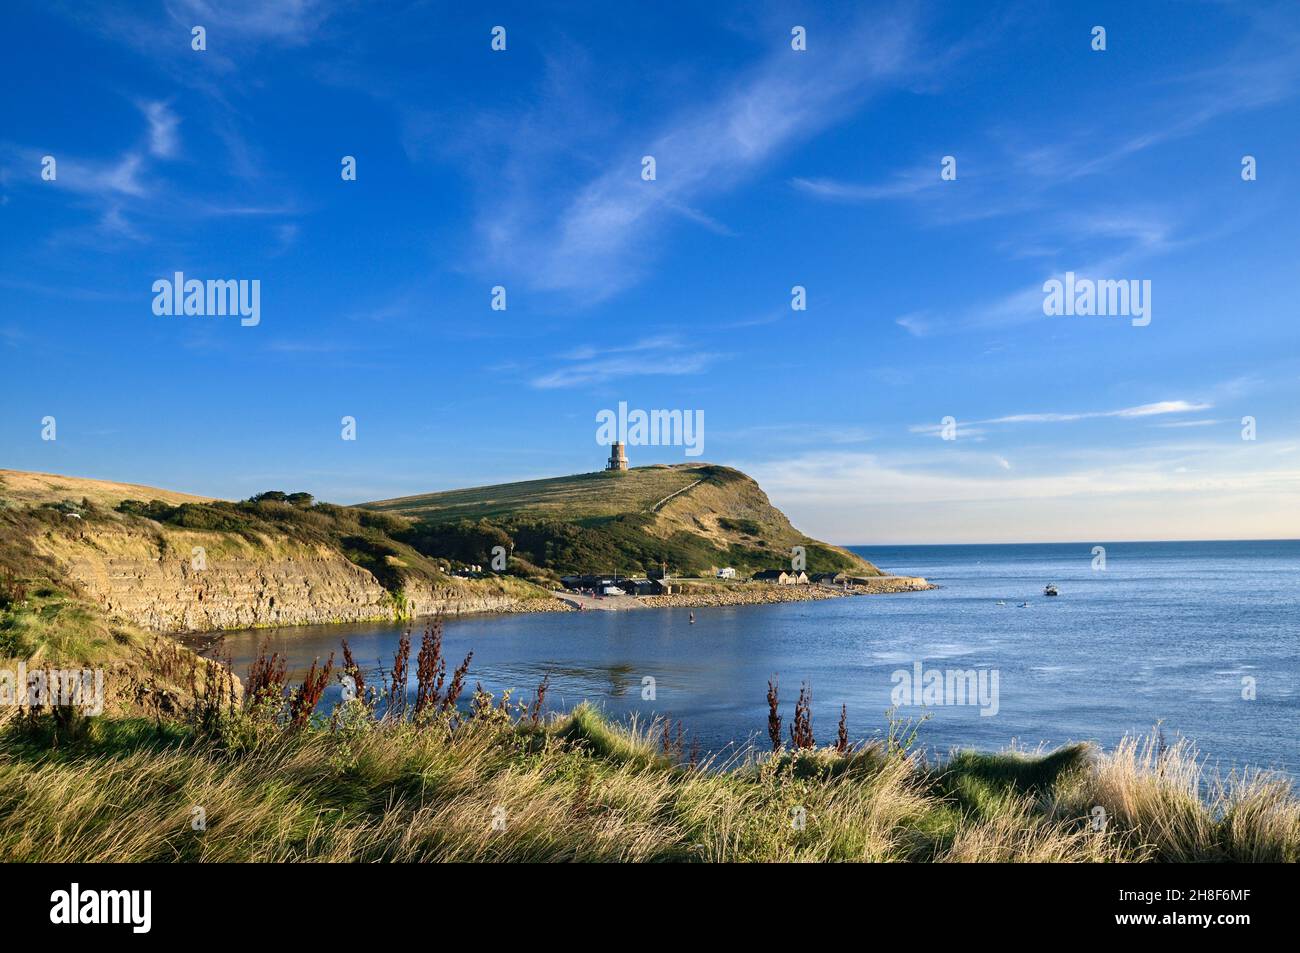 Kimmeridge Bay and Clavell Tower on top of Hen Cliff, Isle of Purbeck, Jurassic Coast World Heritage Site, Dorset, England, UK Stock Photo